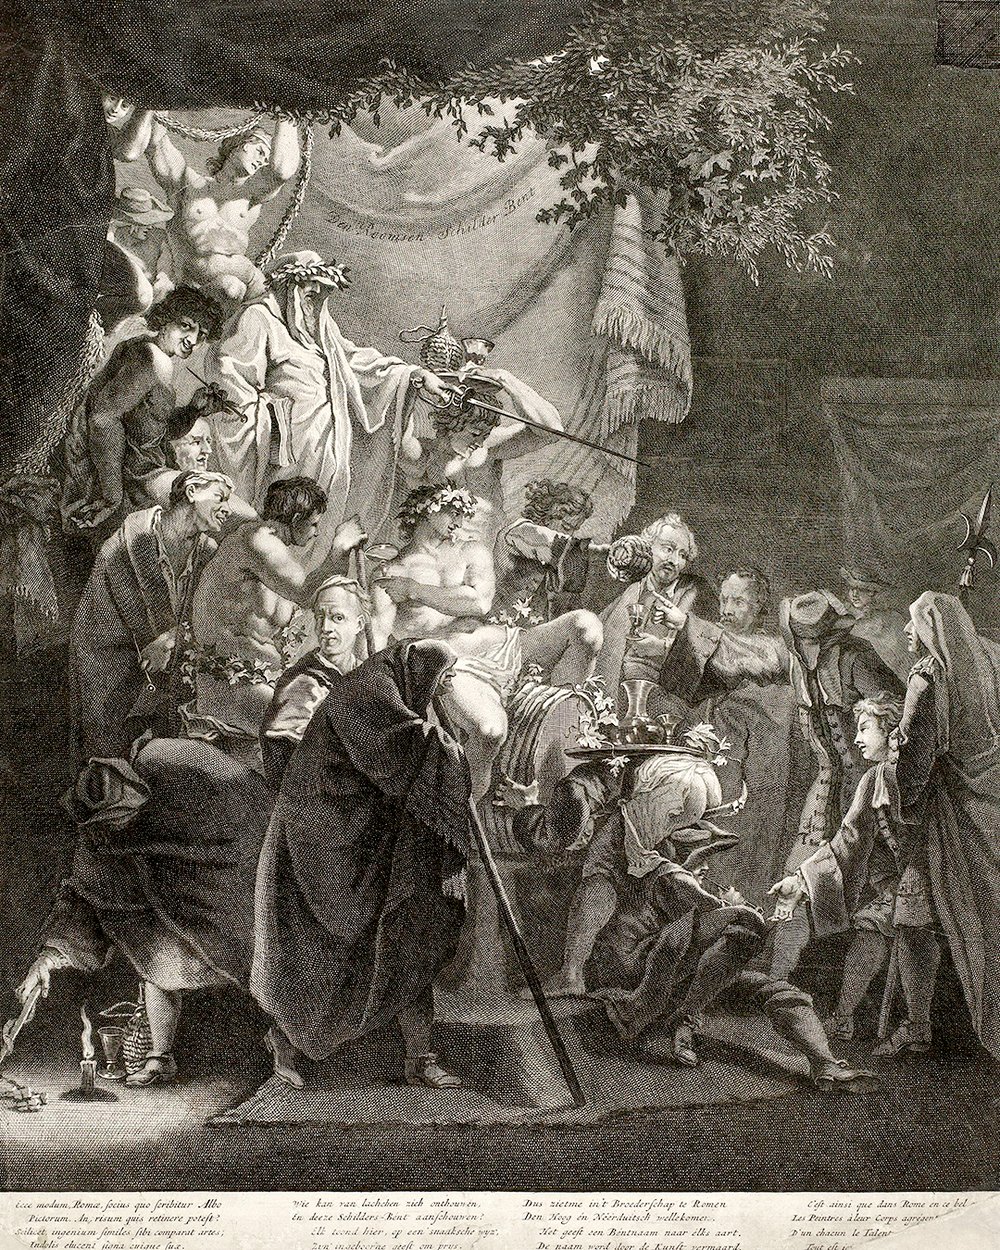 "Reception of a new member of the Bentvueghels" (1690 - 1710)